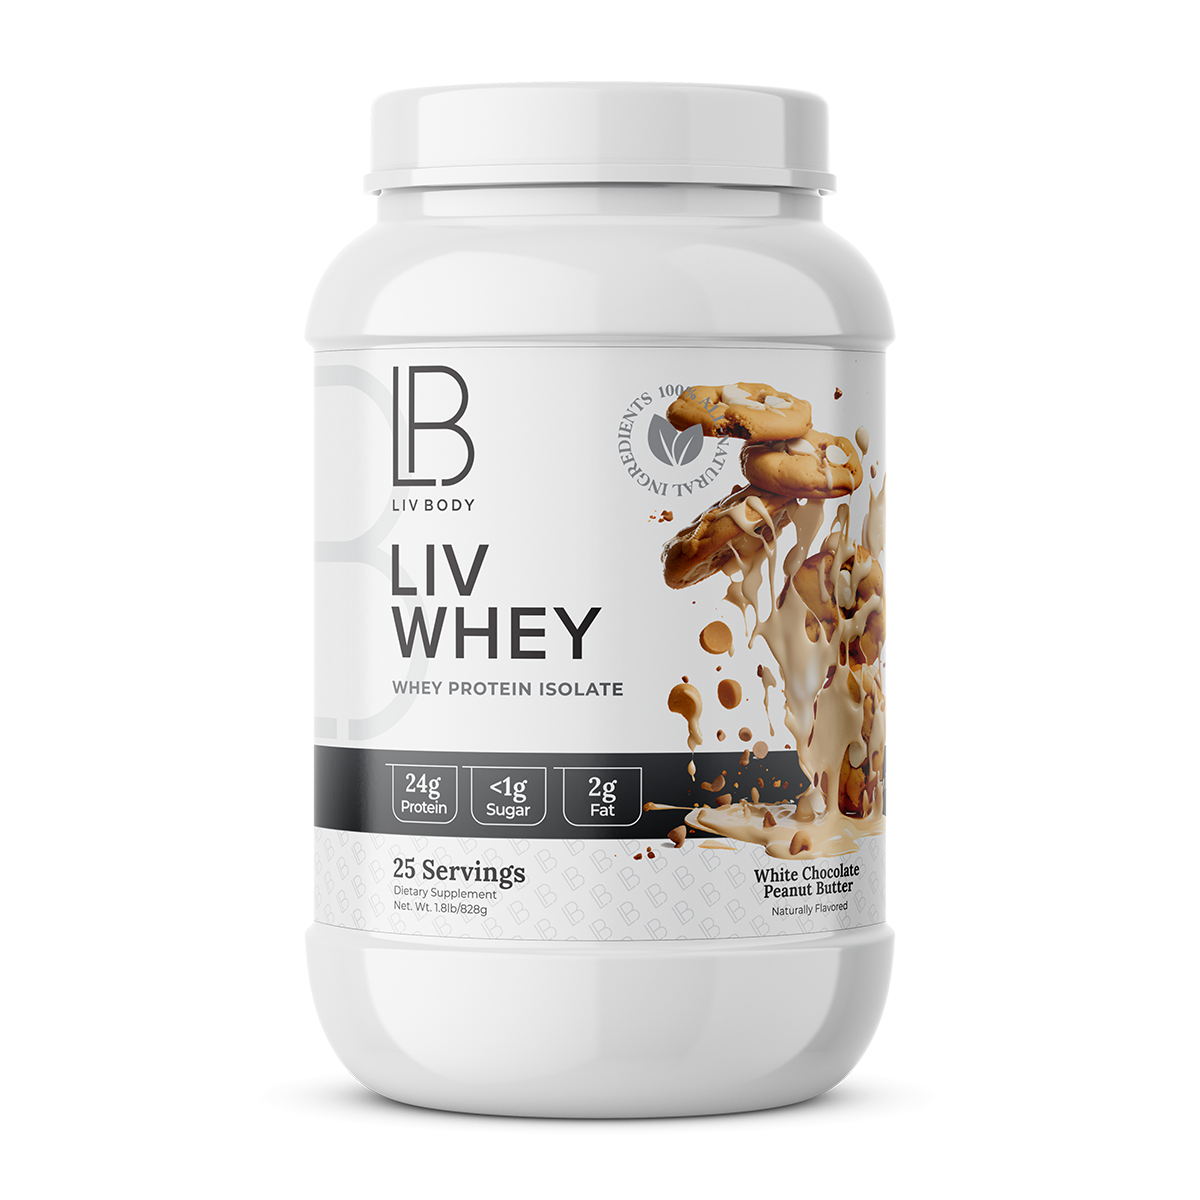 Image of LIV Whey - Isolate Protein, a top-ranked post-workout supplement that can help reduce muscle soreness.